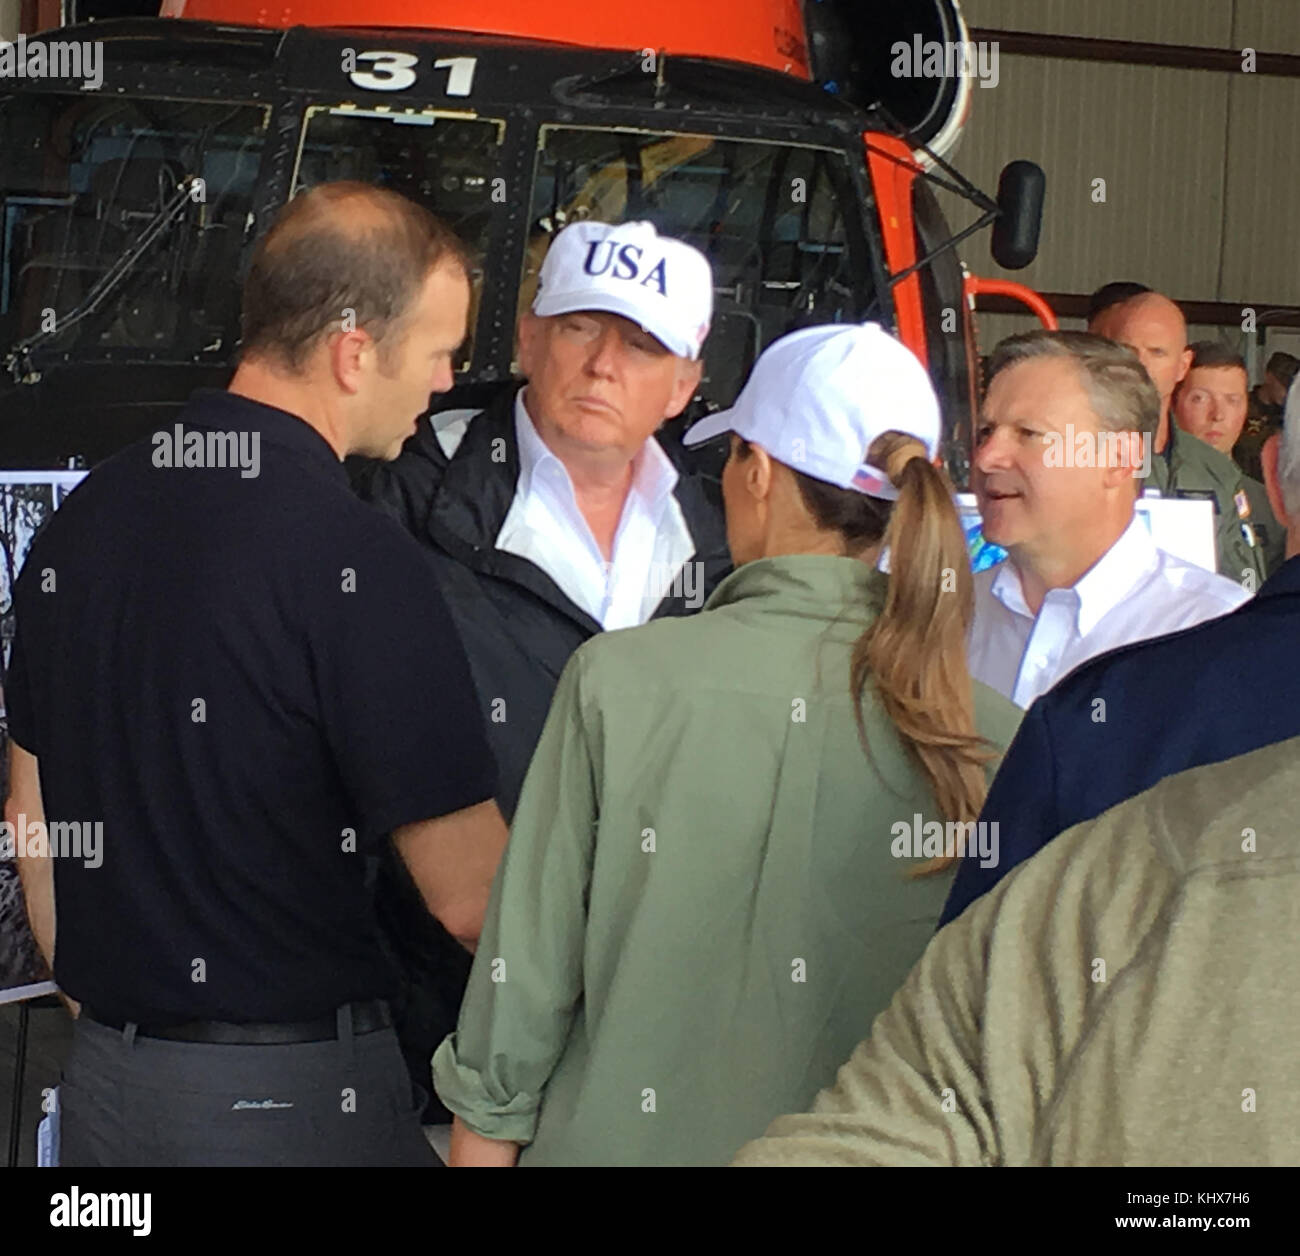 FORT MYERS, FL - SEPTEMBER 14: US President Donald Trump, with First Lady Melania Trump, Vice President Mike Pence and Florida Governor Rick Scott at Hangar Bay 3, Southwest Florida International Airport Fort Myers, Florida  prior to their tour of  the Naples Estates neighborhood that was damaged during Hurricane Irma September 14, 2017 in Fort Myers, Florida.    People:  Donald Trump, Melania Trump, Rick Scott, Mike Pence Stock Photo